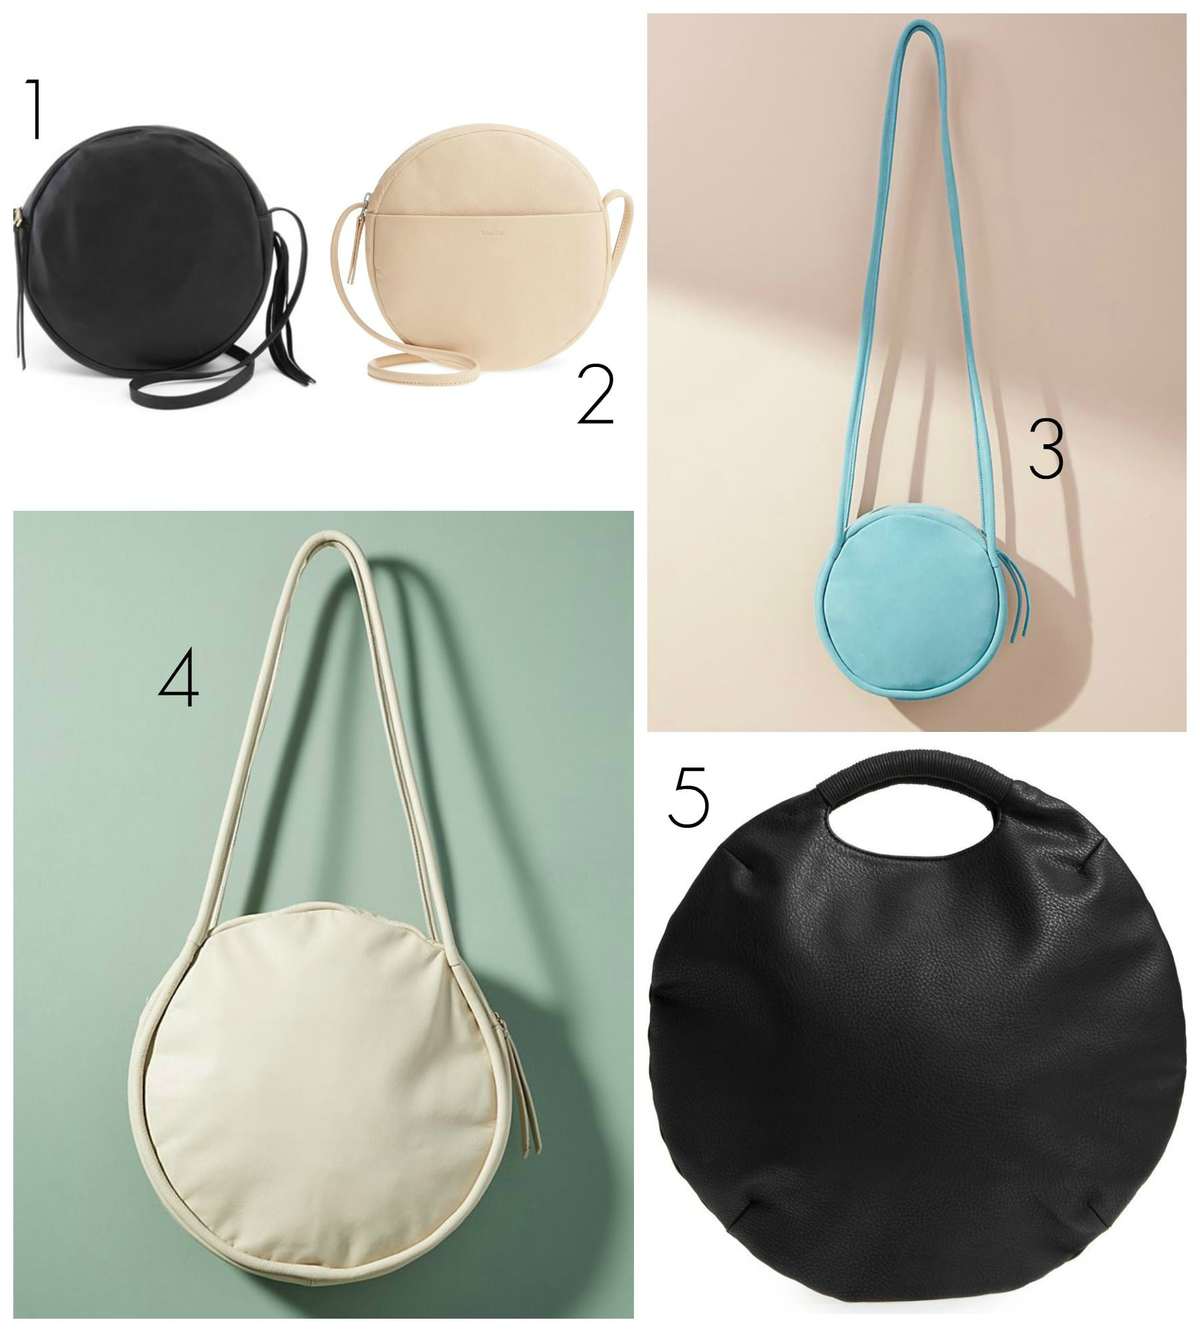 Wardrobe Oxygen picks the best circle bags at every price point for 2018. These minimalist styles will be chic now and seasons to come.